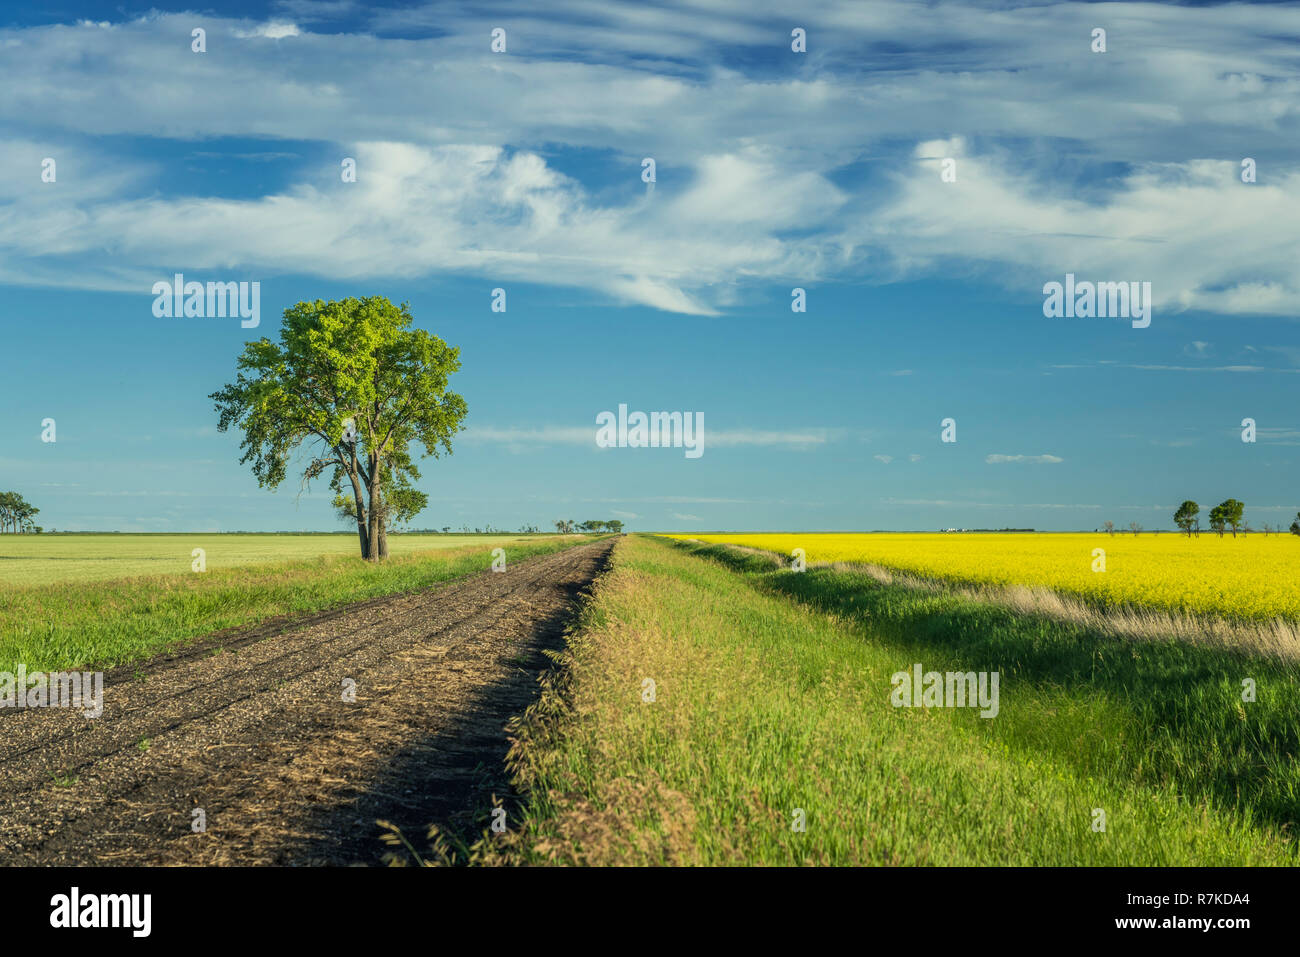 A rural road with canola and grain field near Sperling, Manitoba, Canada. Stock Photo